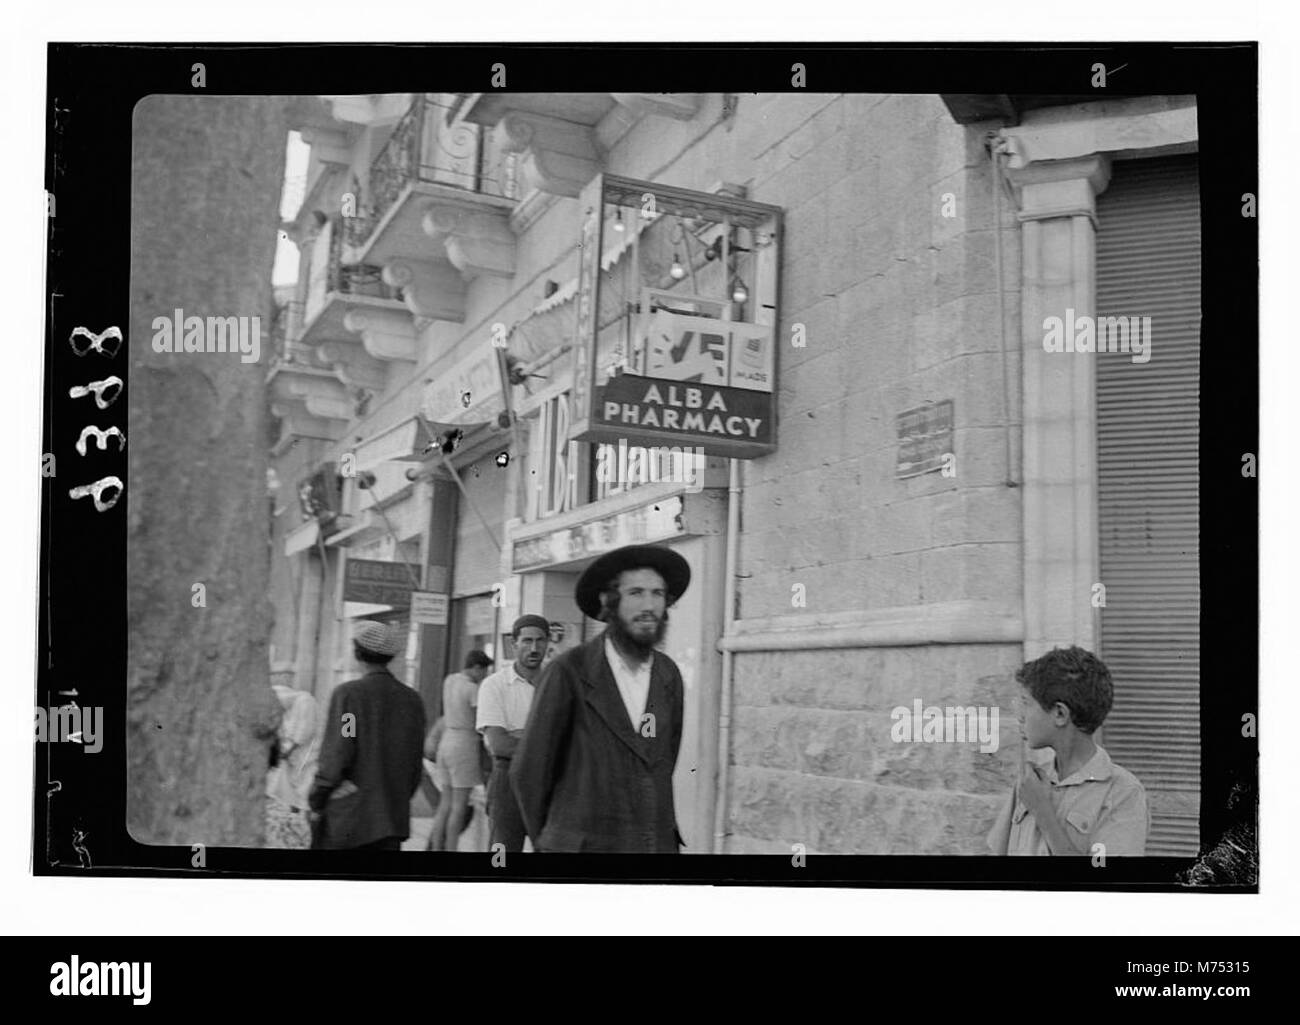 Jewish protest demonstration against Palestine White Paper (May 18 - 1939). Result of evening riot in Zion Circus, broken signs windows, etc. LOC matpc.12405 Stock Photo